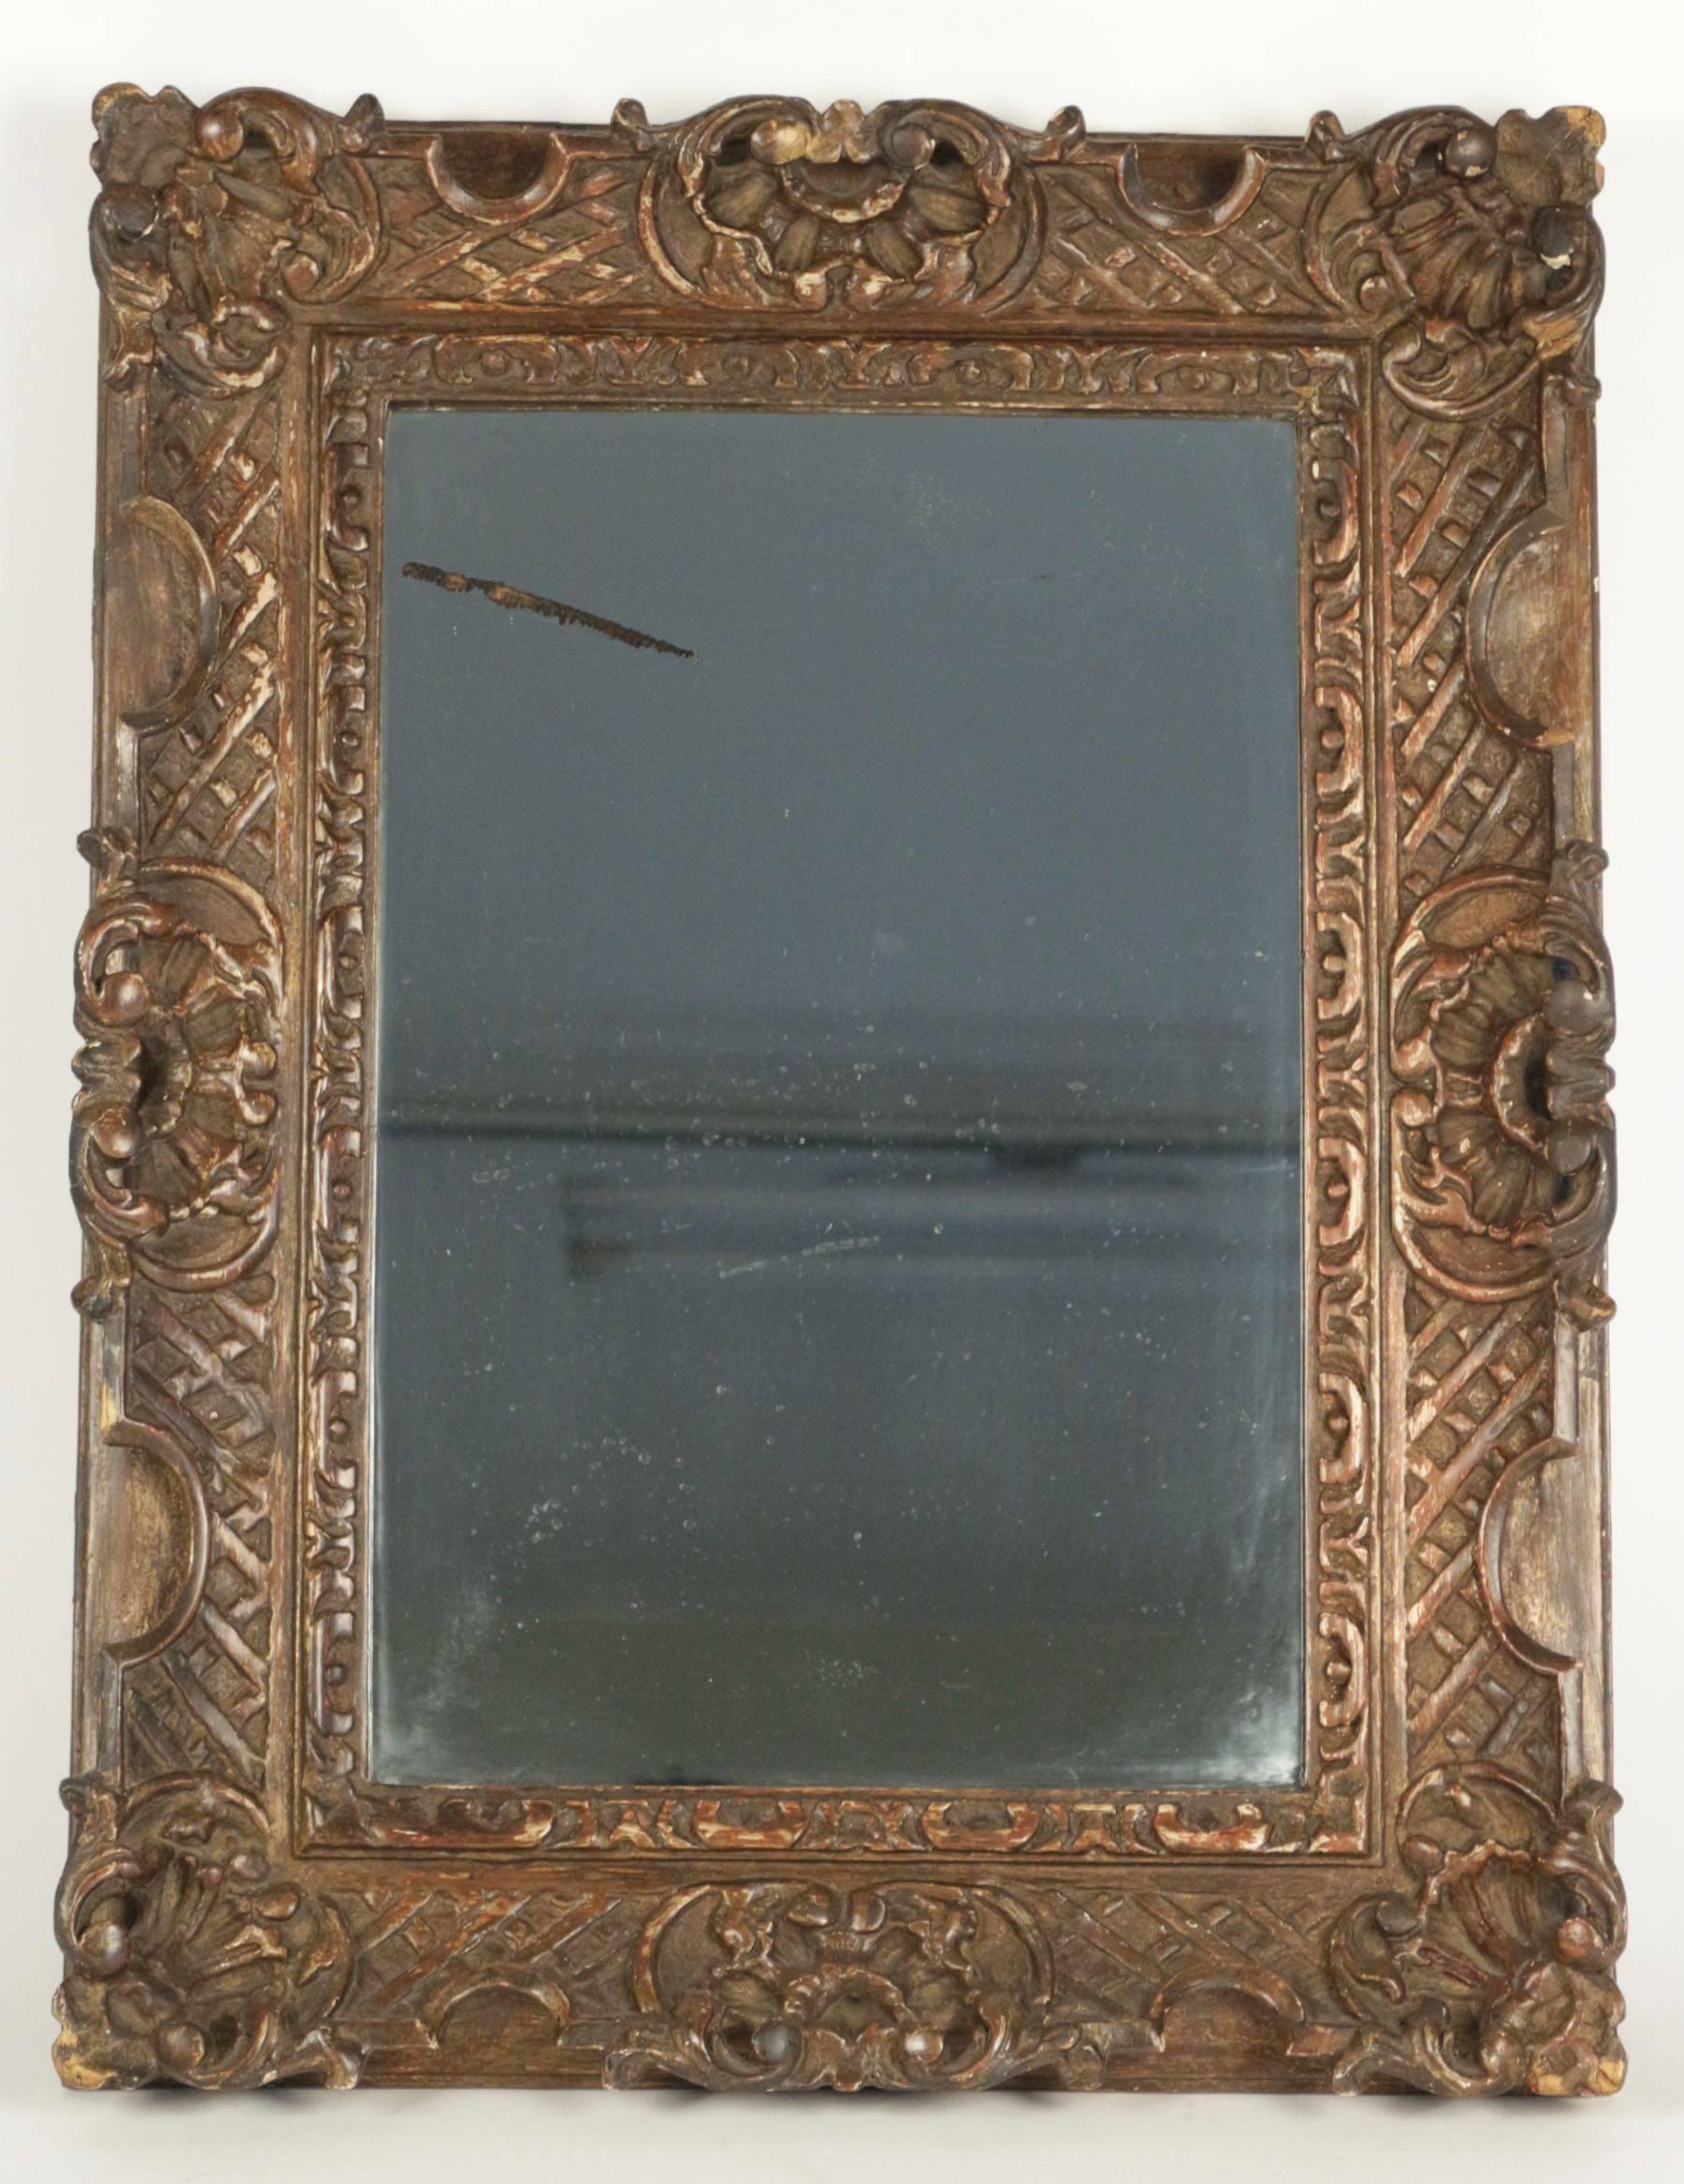 Solid wood hand-carved 19th century mirror with original mercury mirror.
     